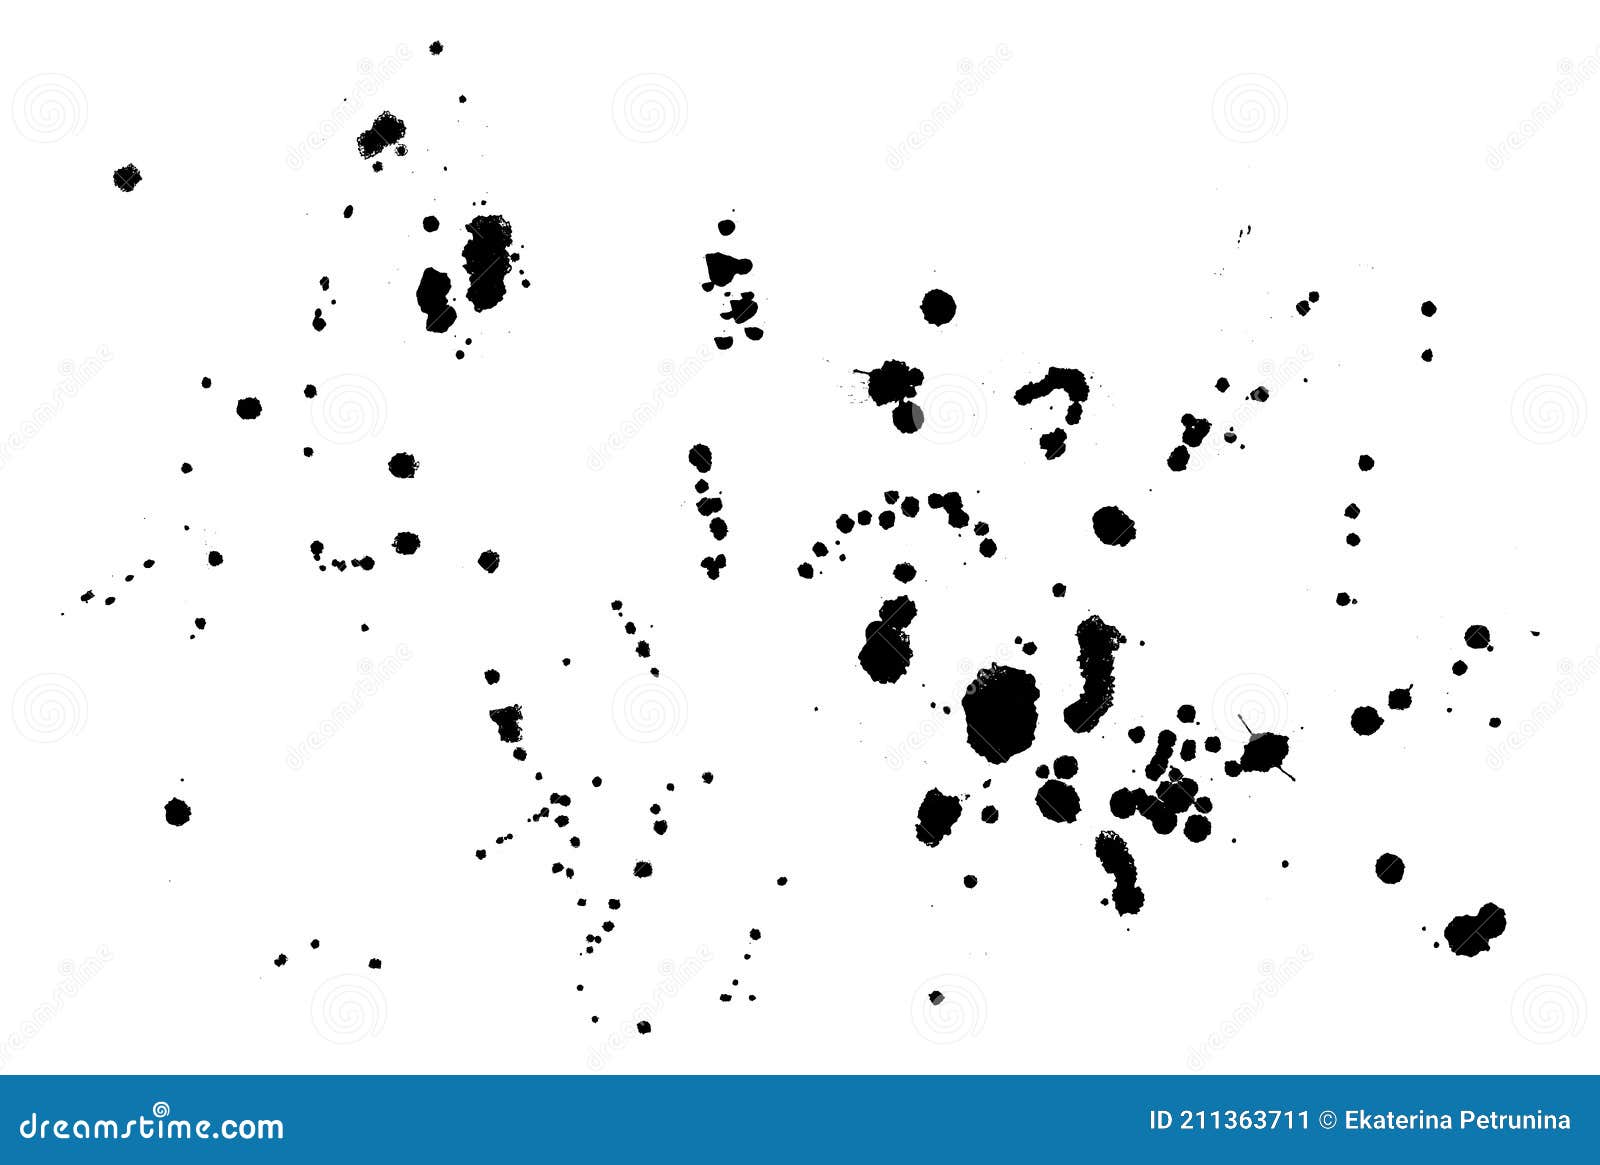 Vector Ink Drizzle Background. Splatter Sprinkle Backdrop with Drops ...